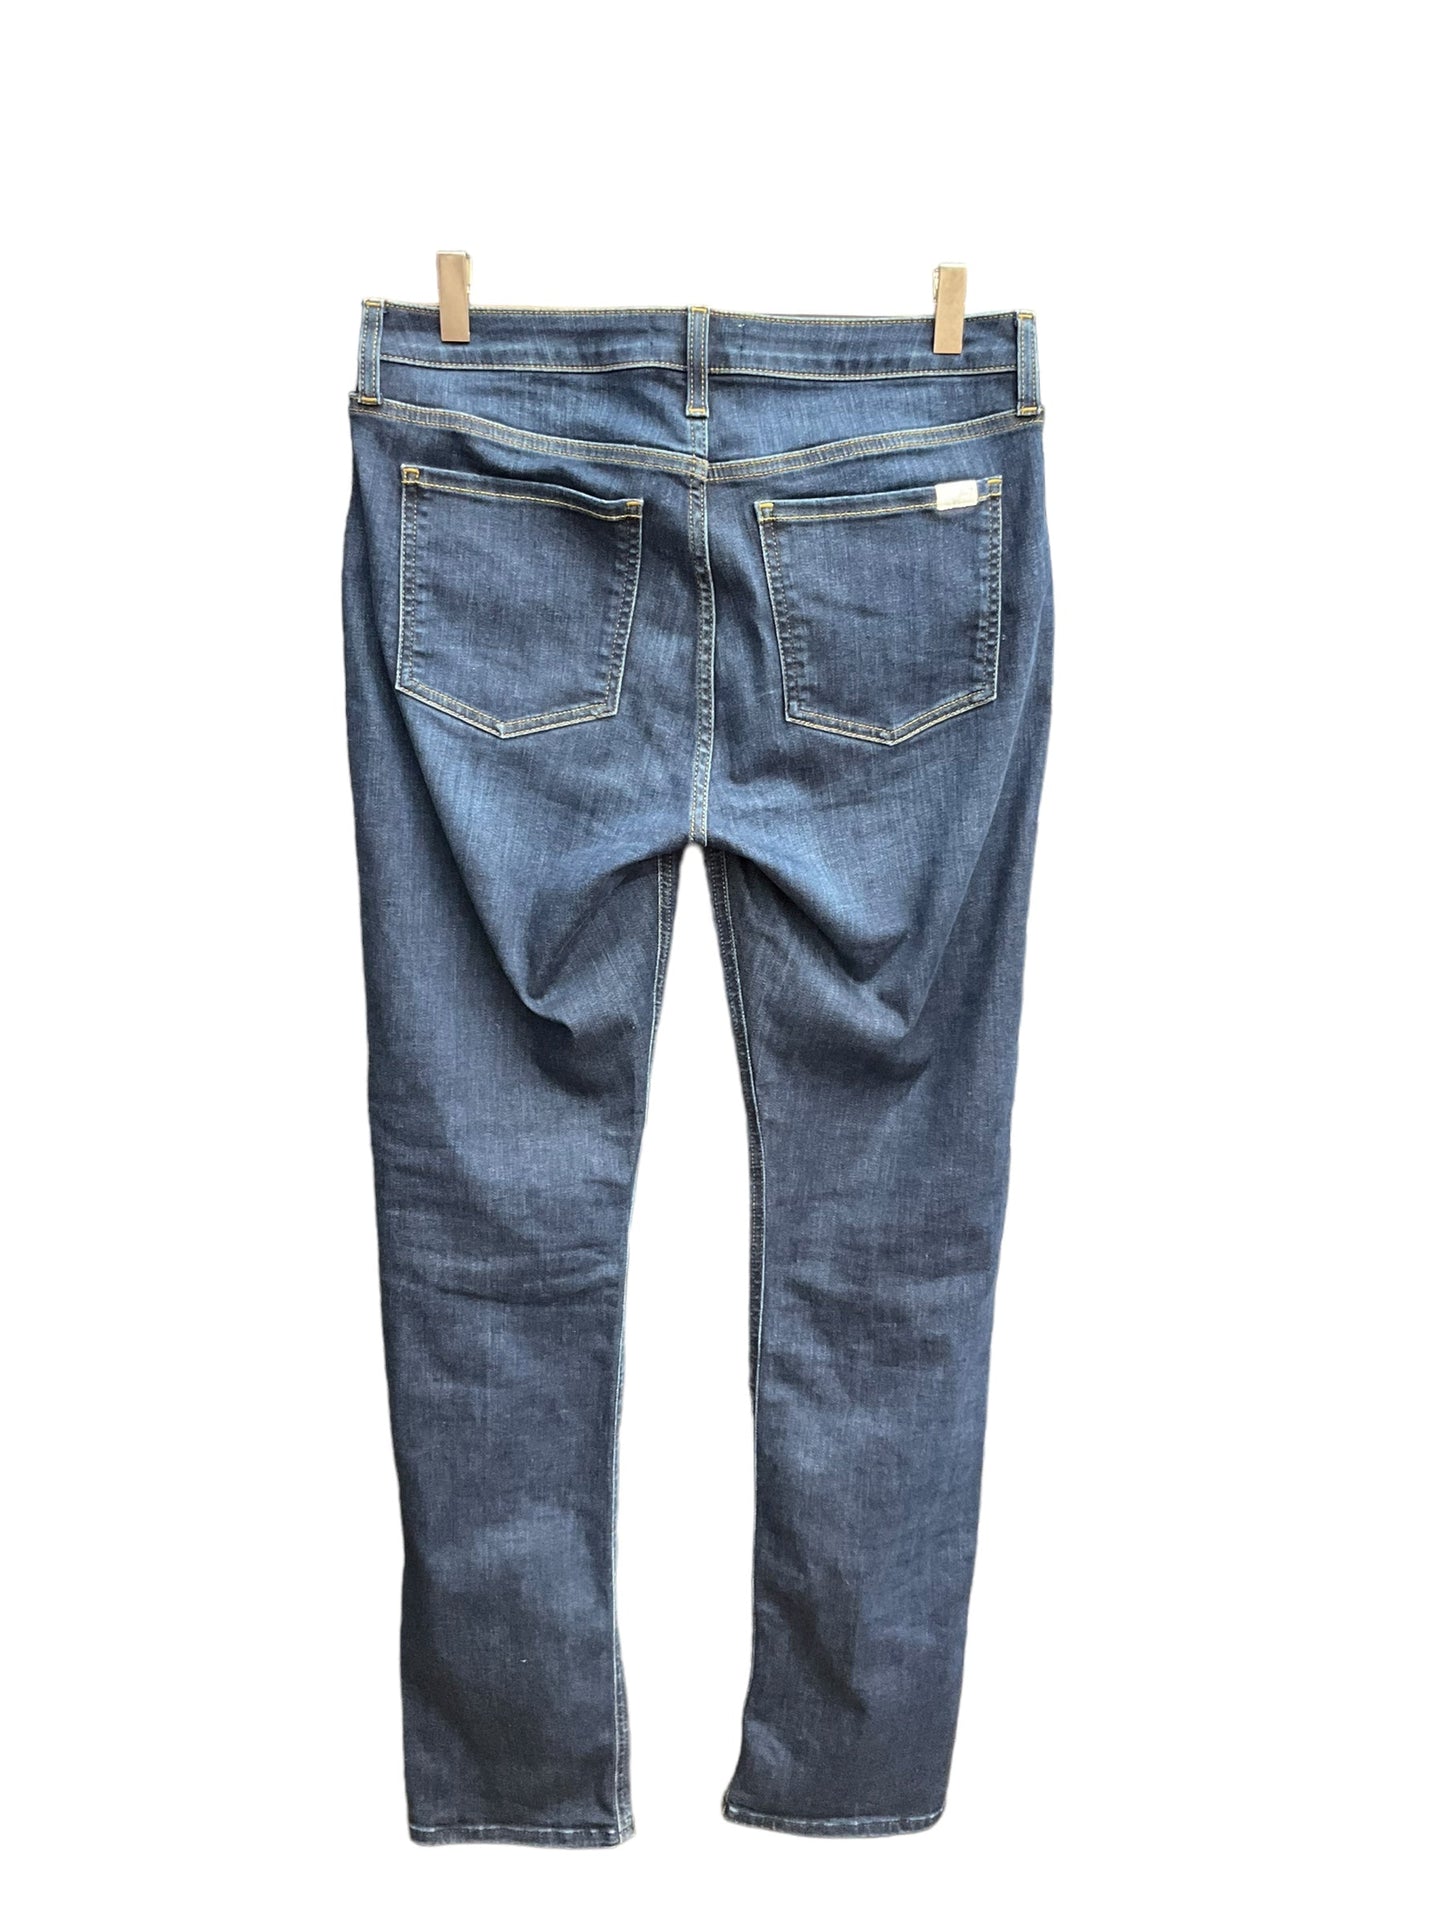 Blue Denim Jeans Straight 7 For All Mankind, Size 8